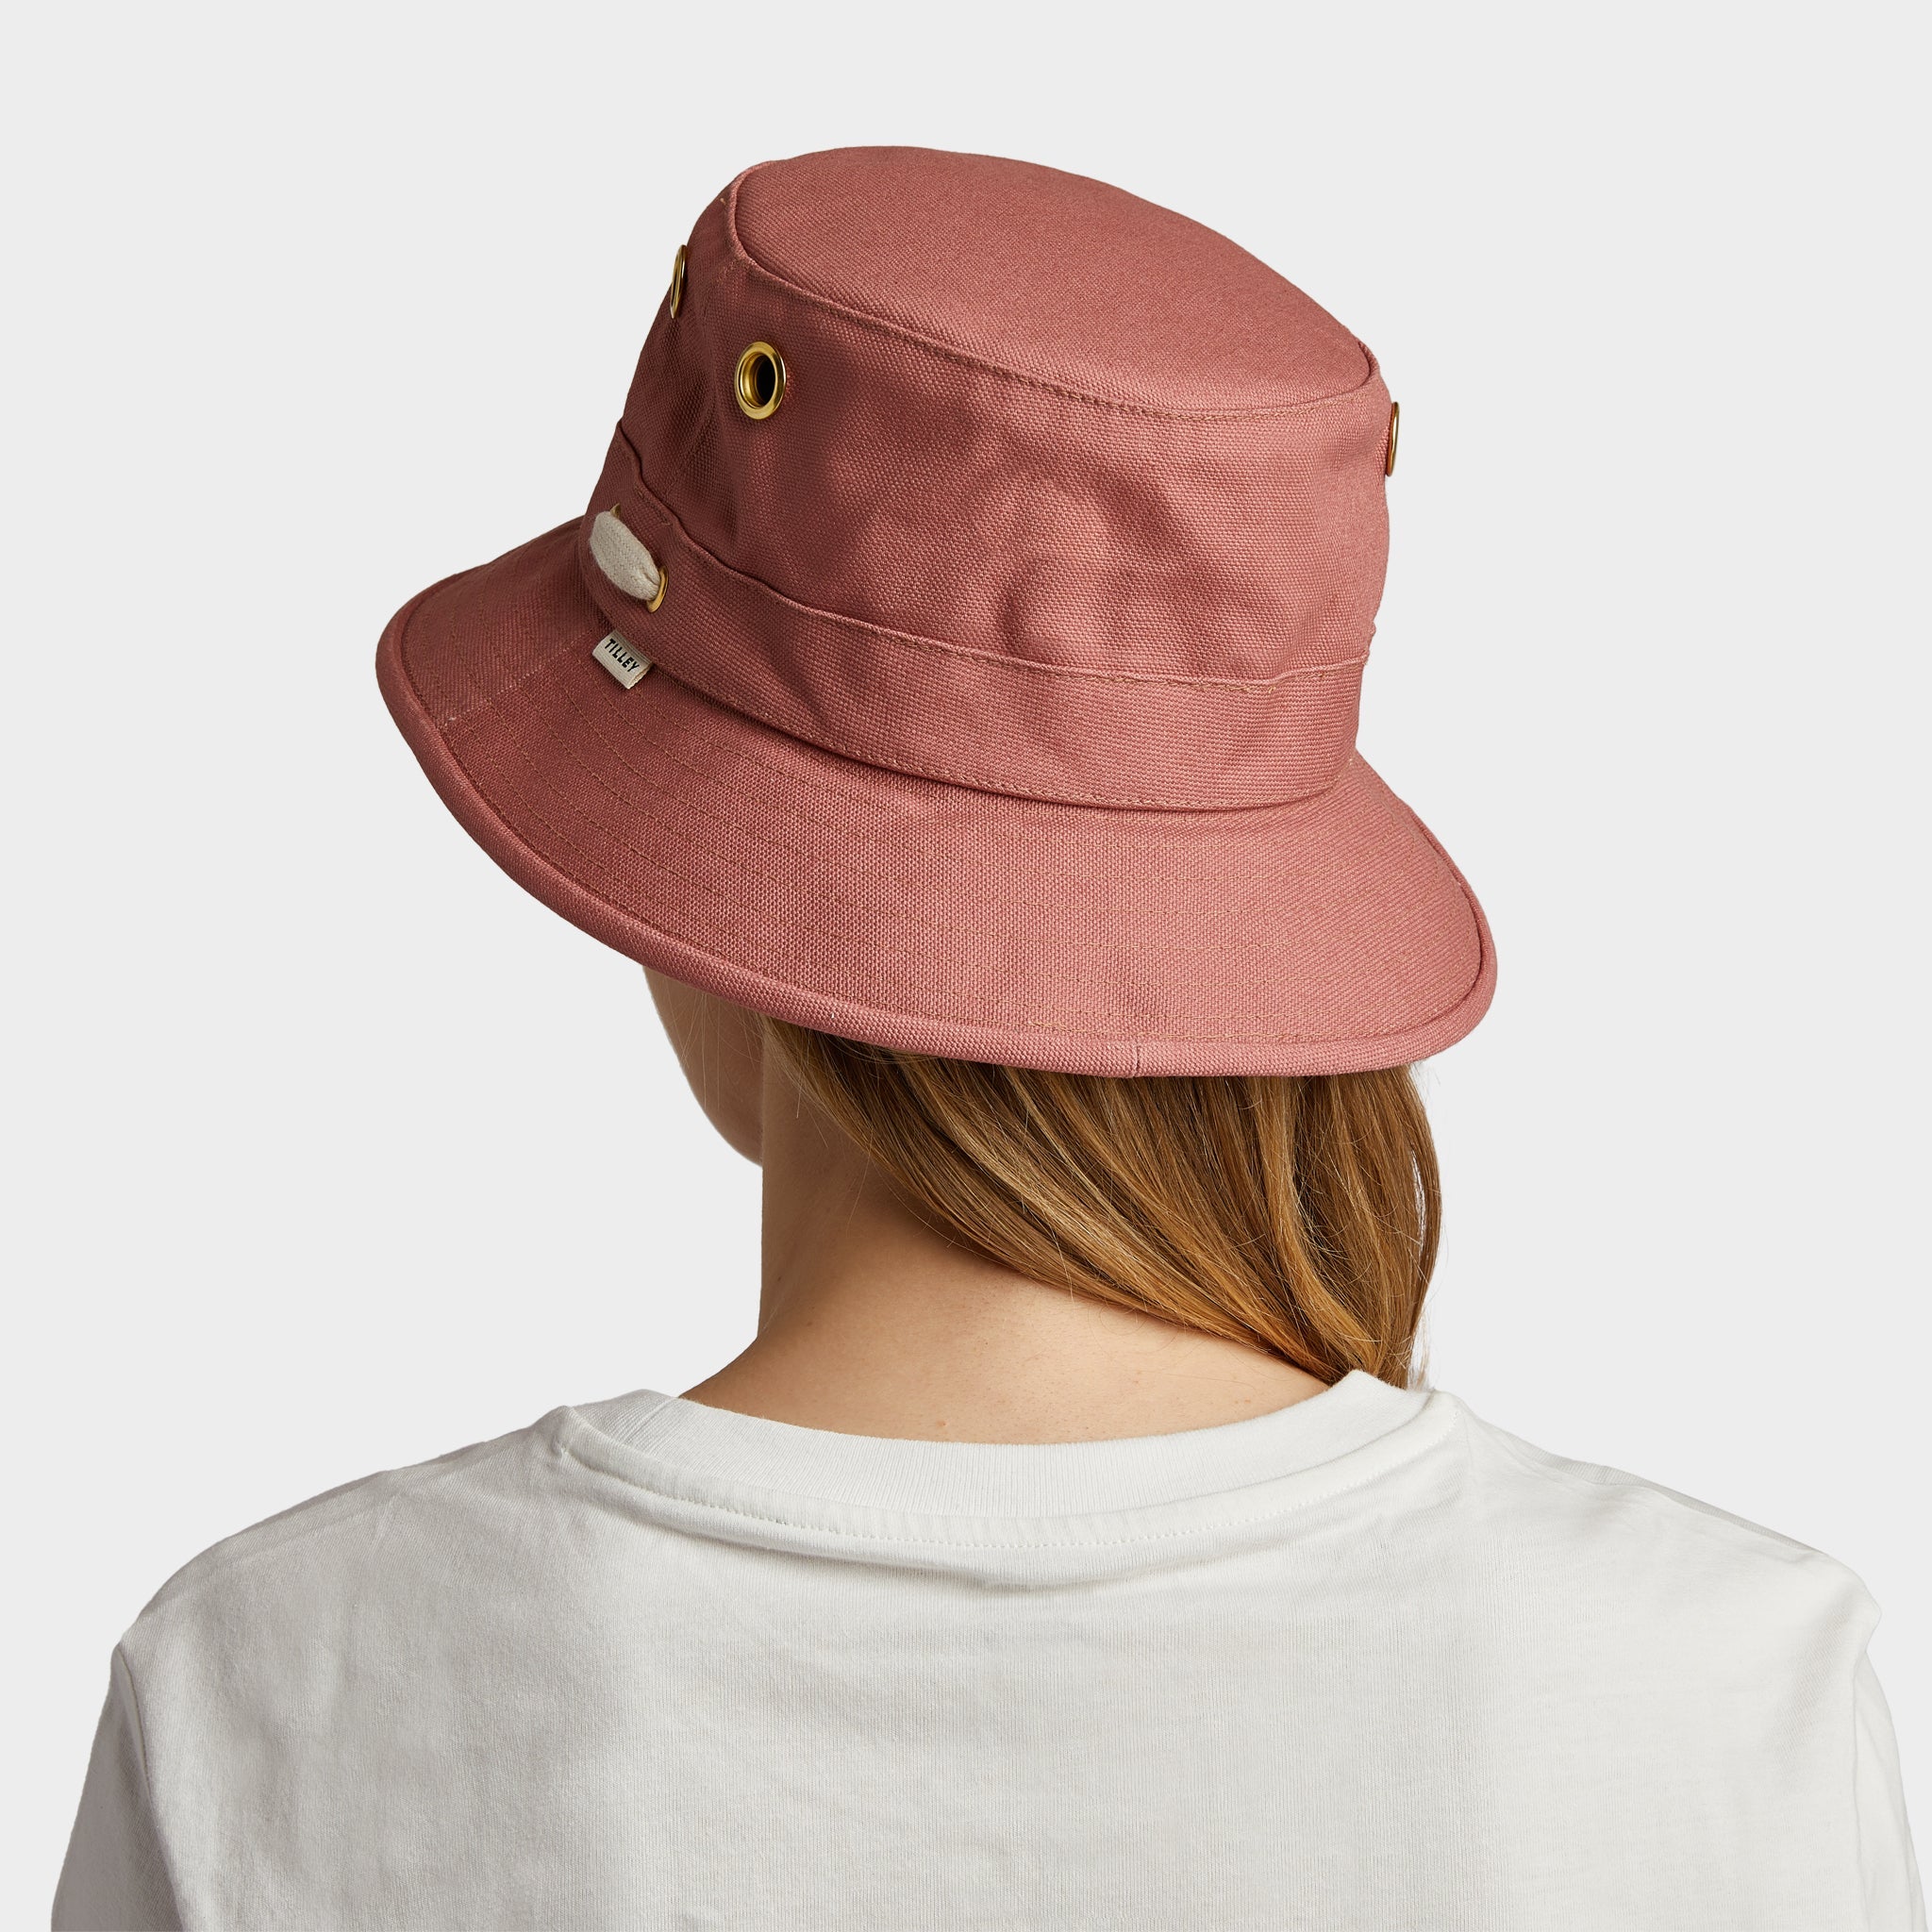 Tilley The Iconic T1 Bucket Hat - Ramakko's Source For Adventure